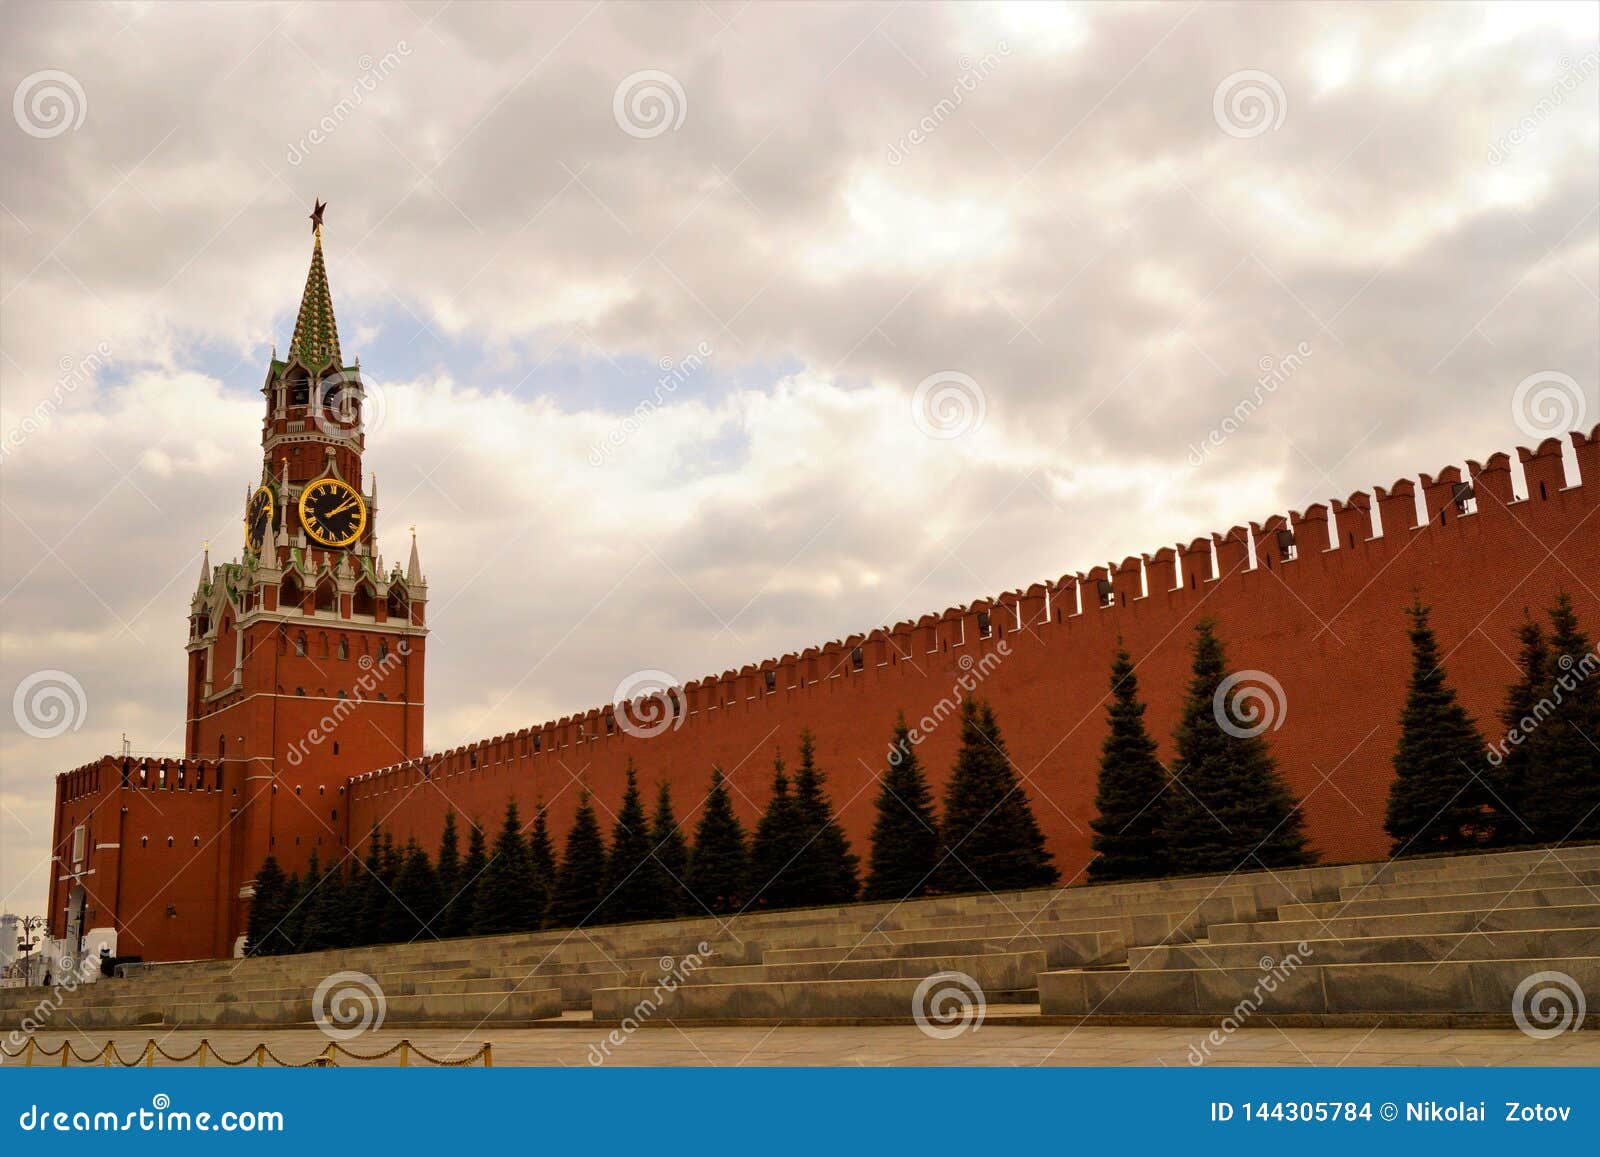 the spasskaya tower was built in 1491 under the guidance of architect pietro solari. in 1624-1625, the english architect